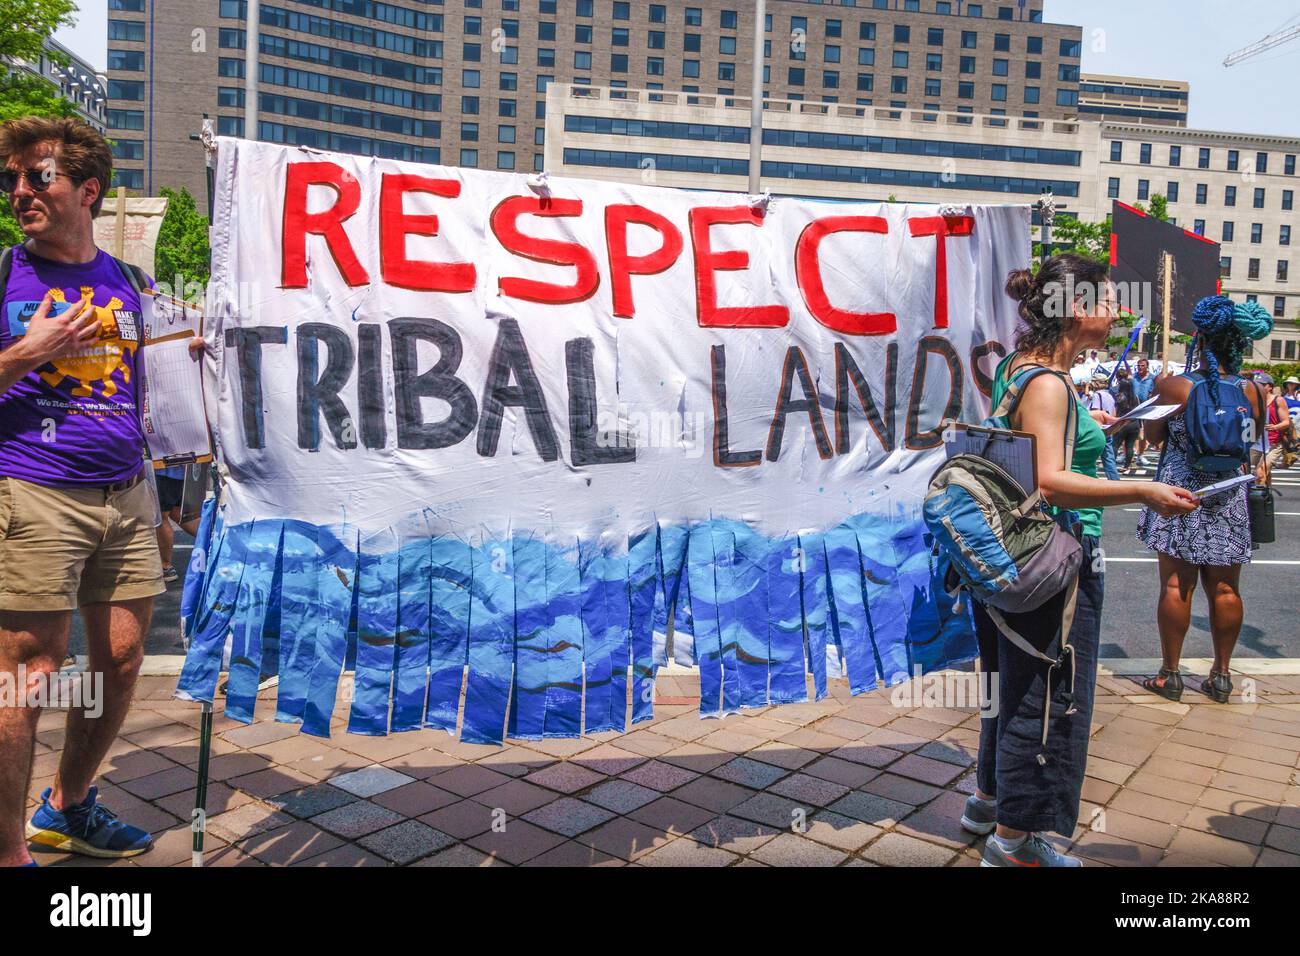 Washington, DC, US-April 29, 2017:  Protesters at climate change demonstration holding sign reading 'Respect Tribal Lands'. Stock Photo